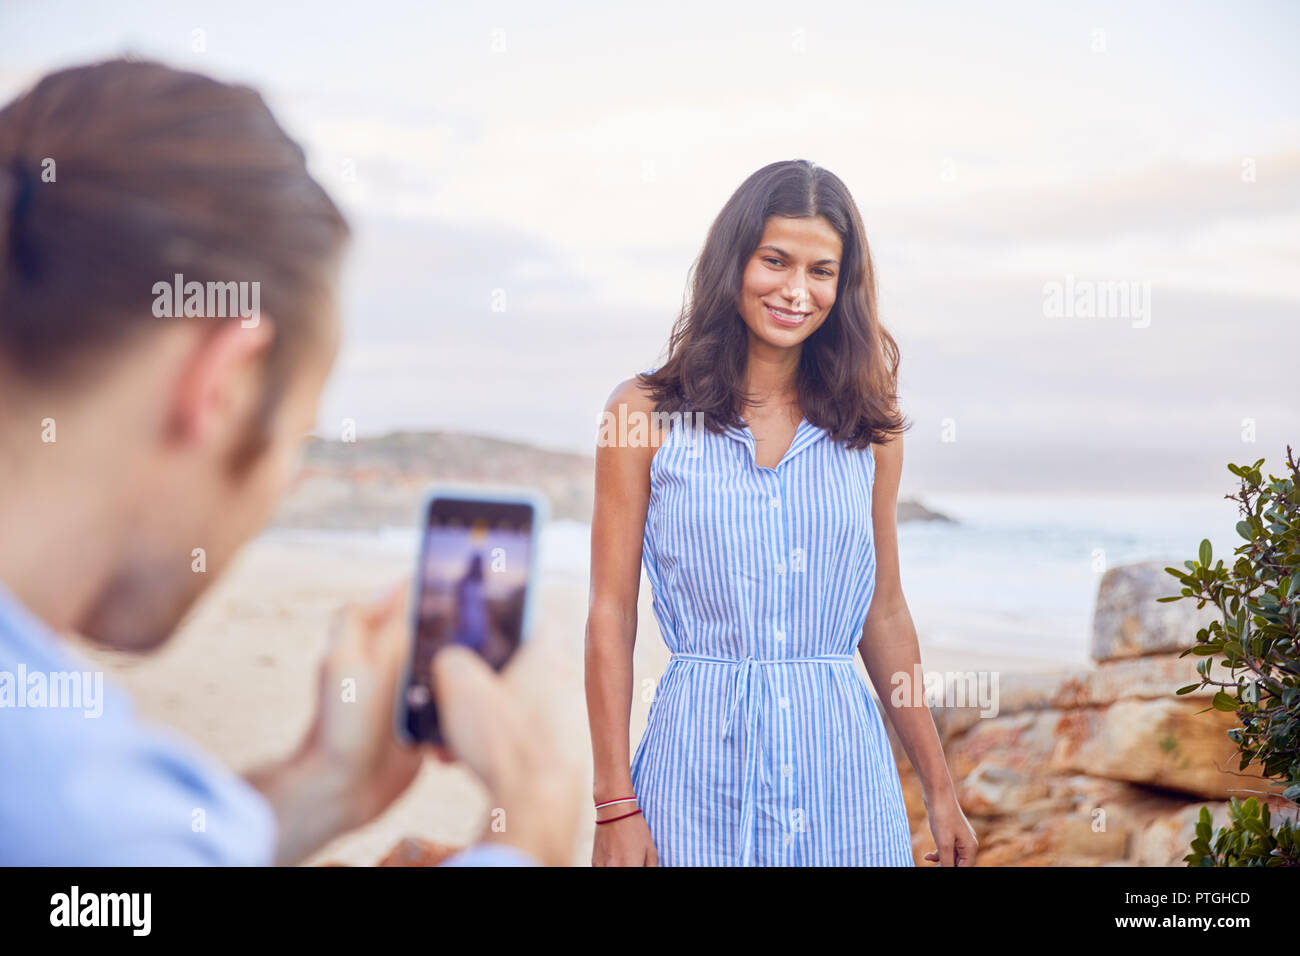 Young man with smart phone photographing girlfriend at beach Stock Photo